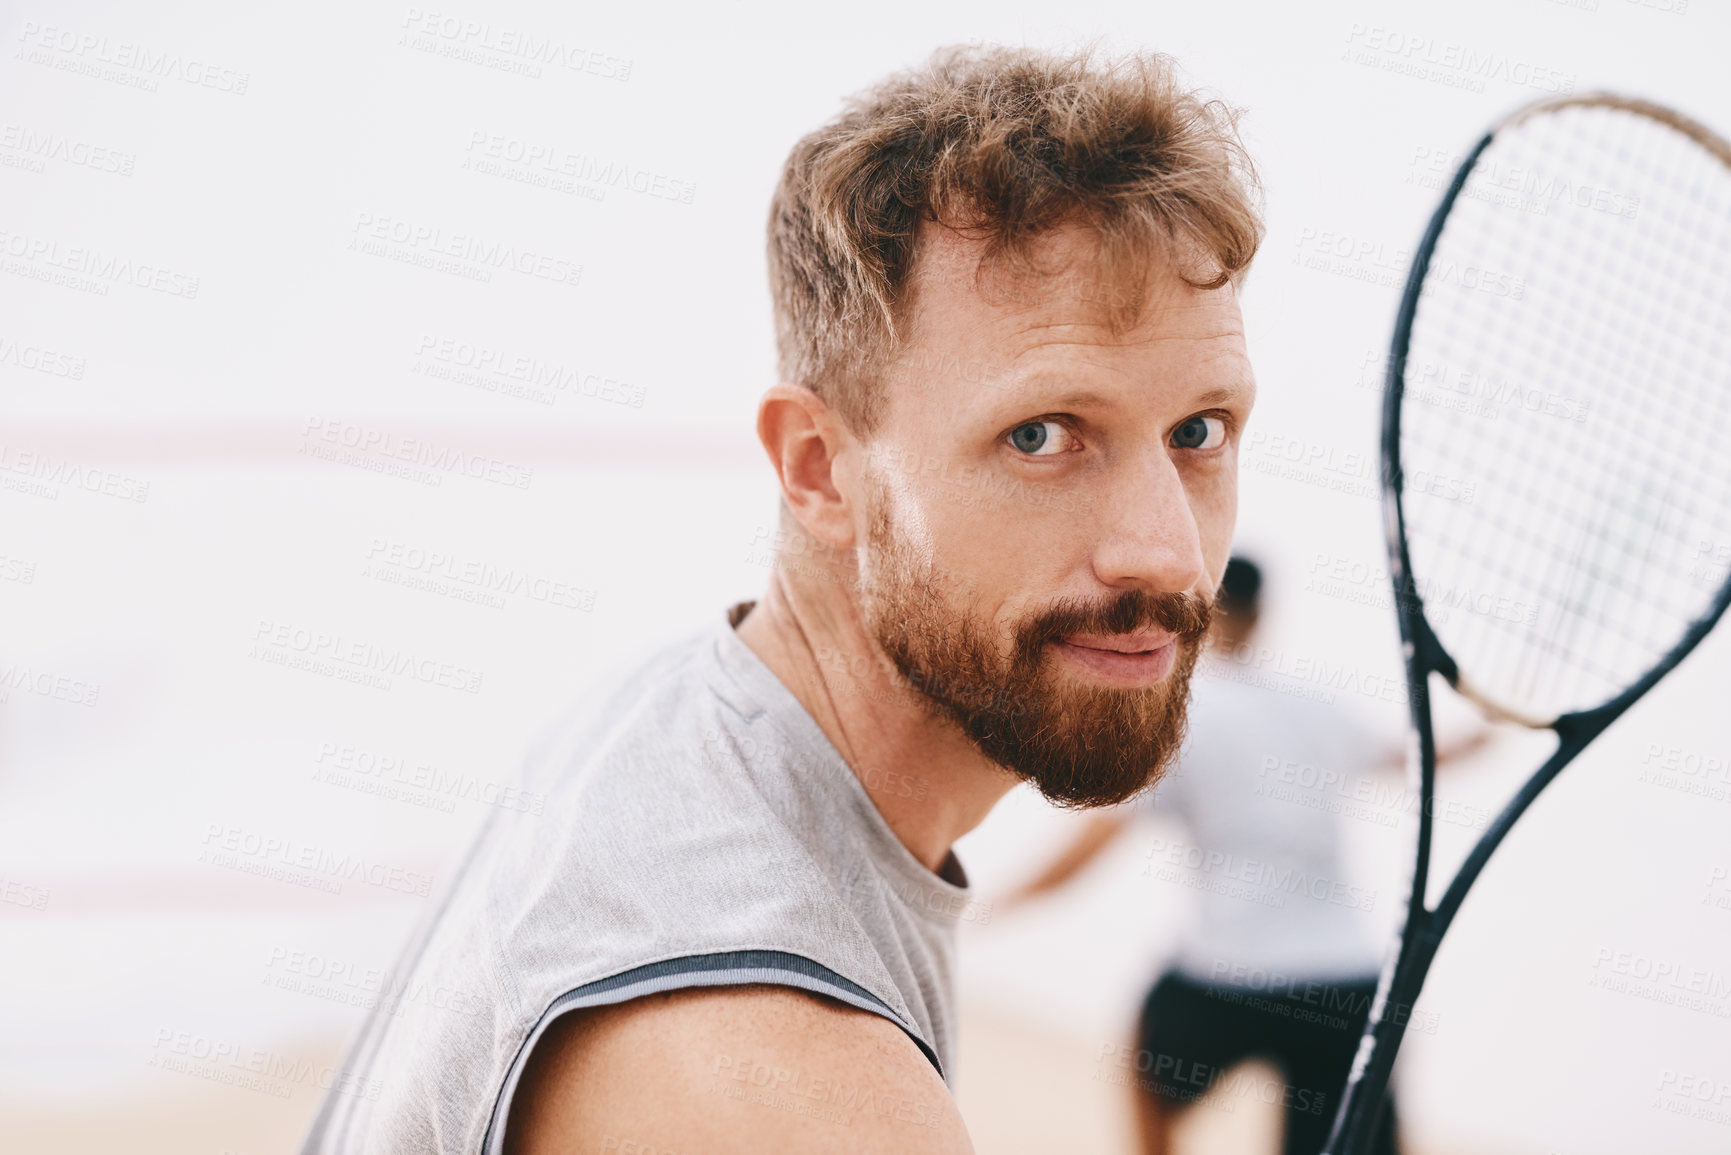 Buy stock photo Portrait of a young man playing a game of squash with his team mate in the background